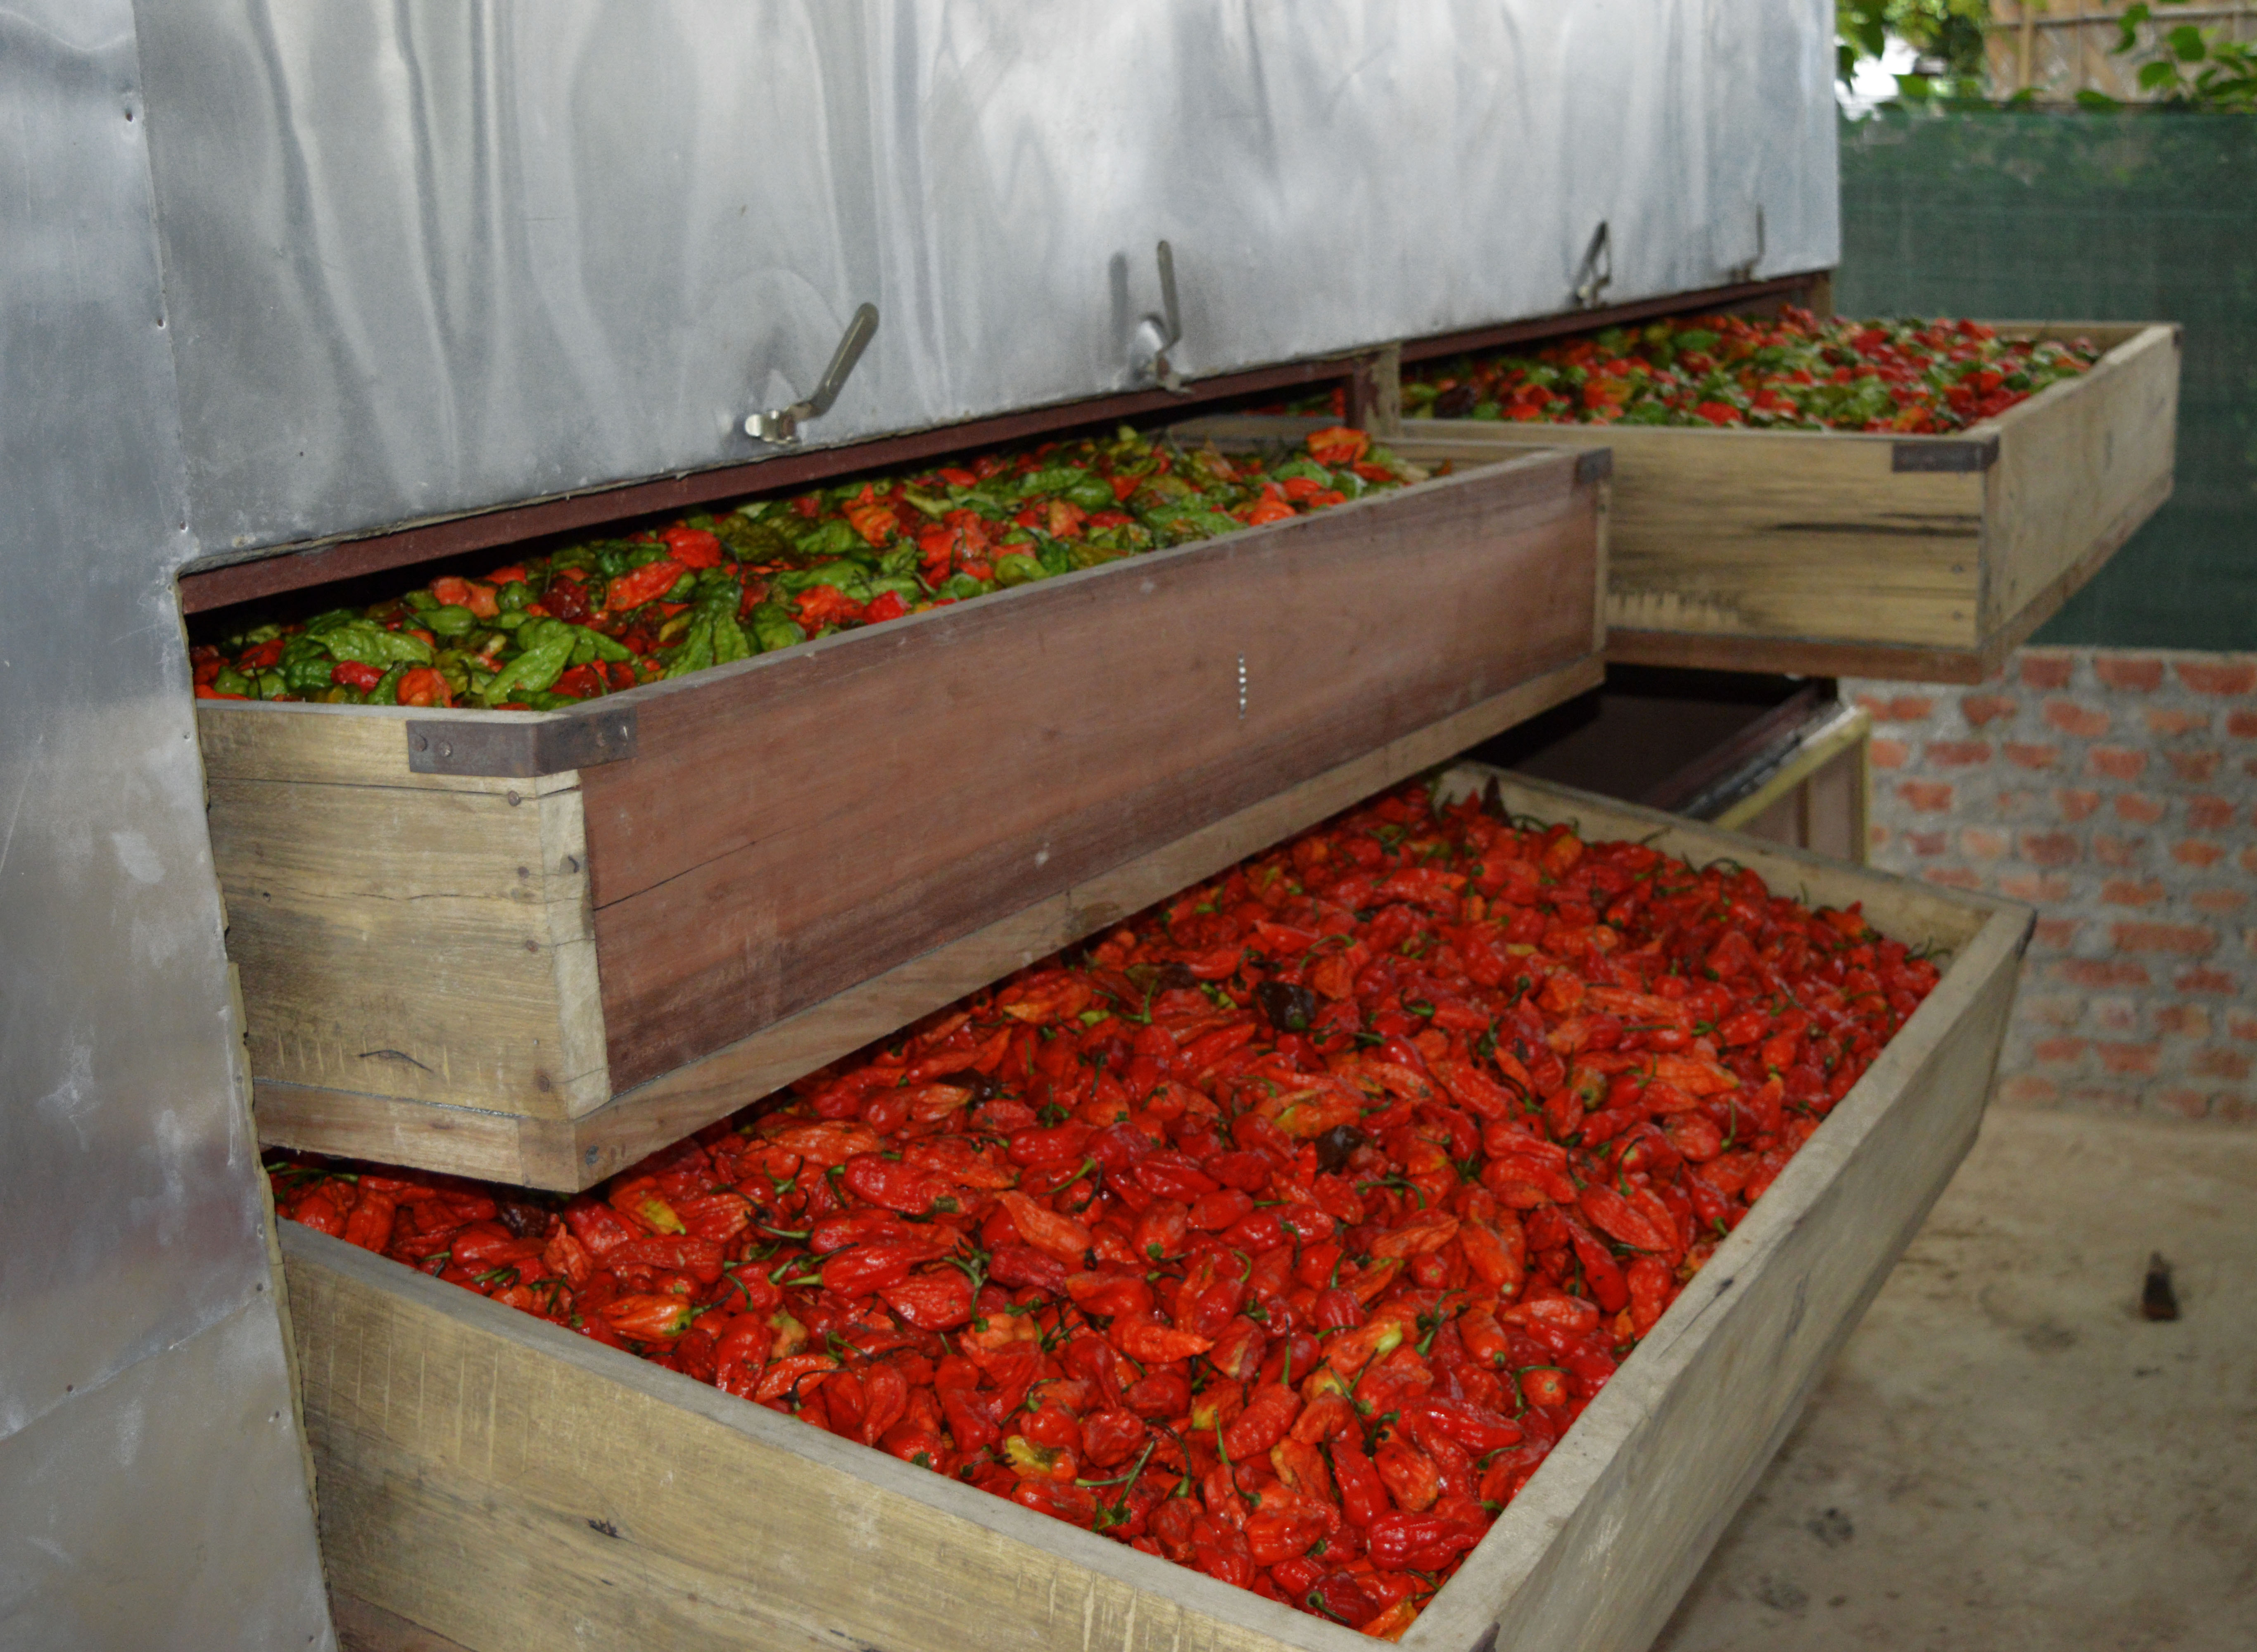 chillies-on-the-web-nagas-being-loaded-into-the-oven-to-dry-image.jpg